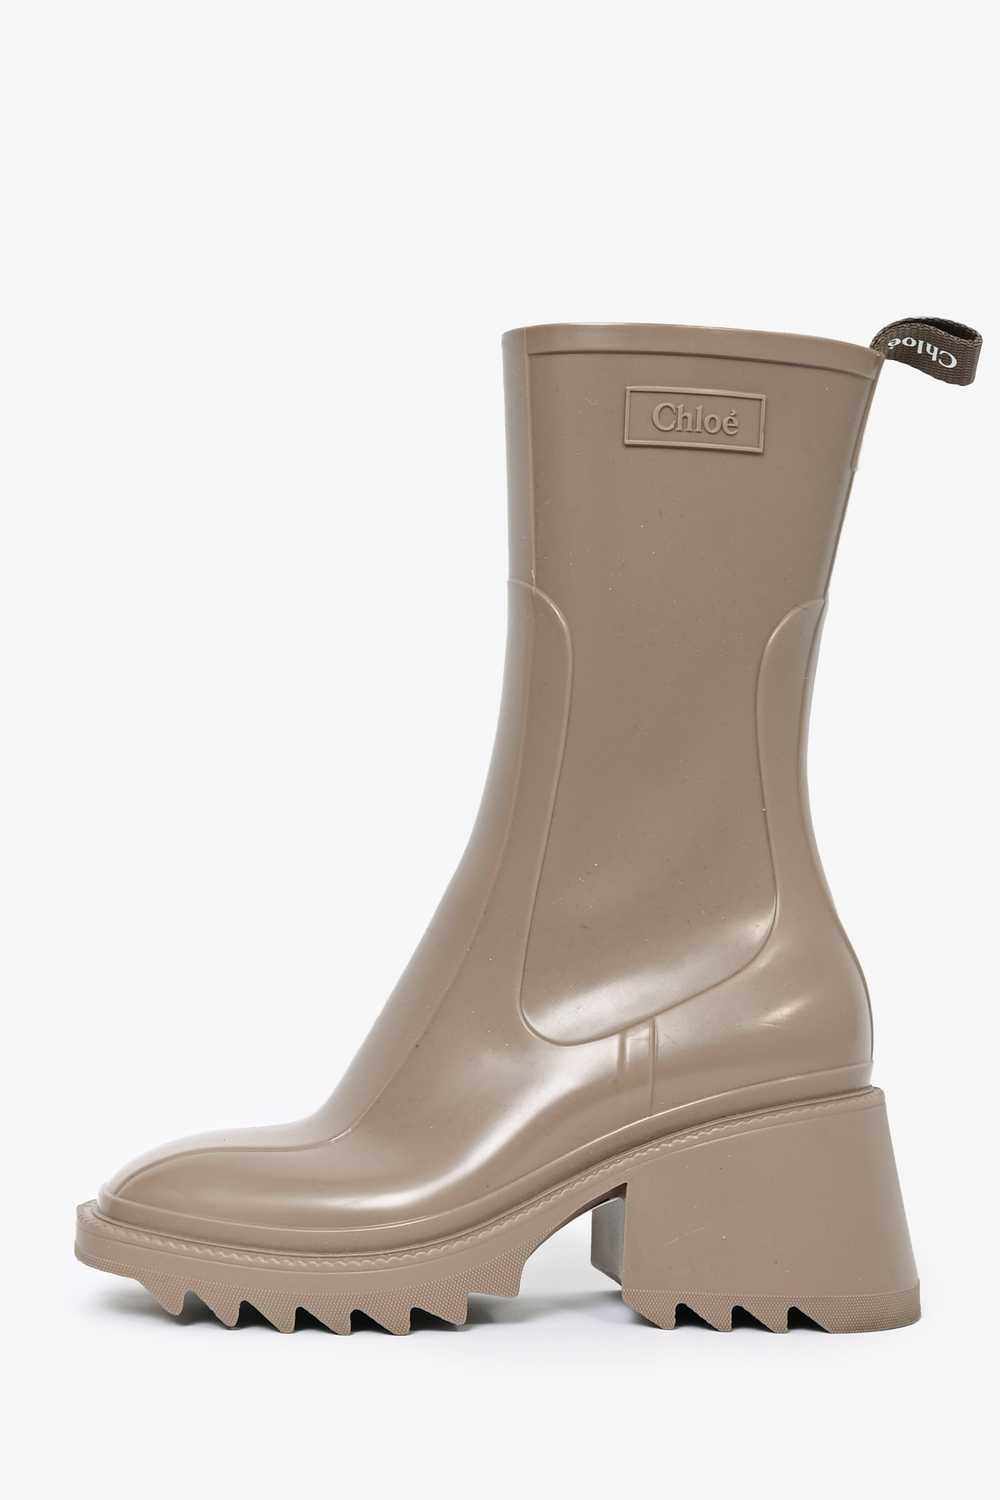 Chloe Taupe Zip Up 'Betty' Rain Boots Size 35 - image 4